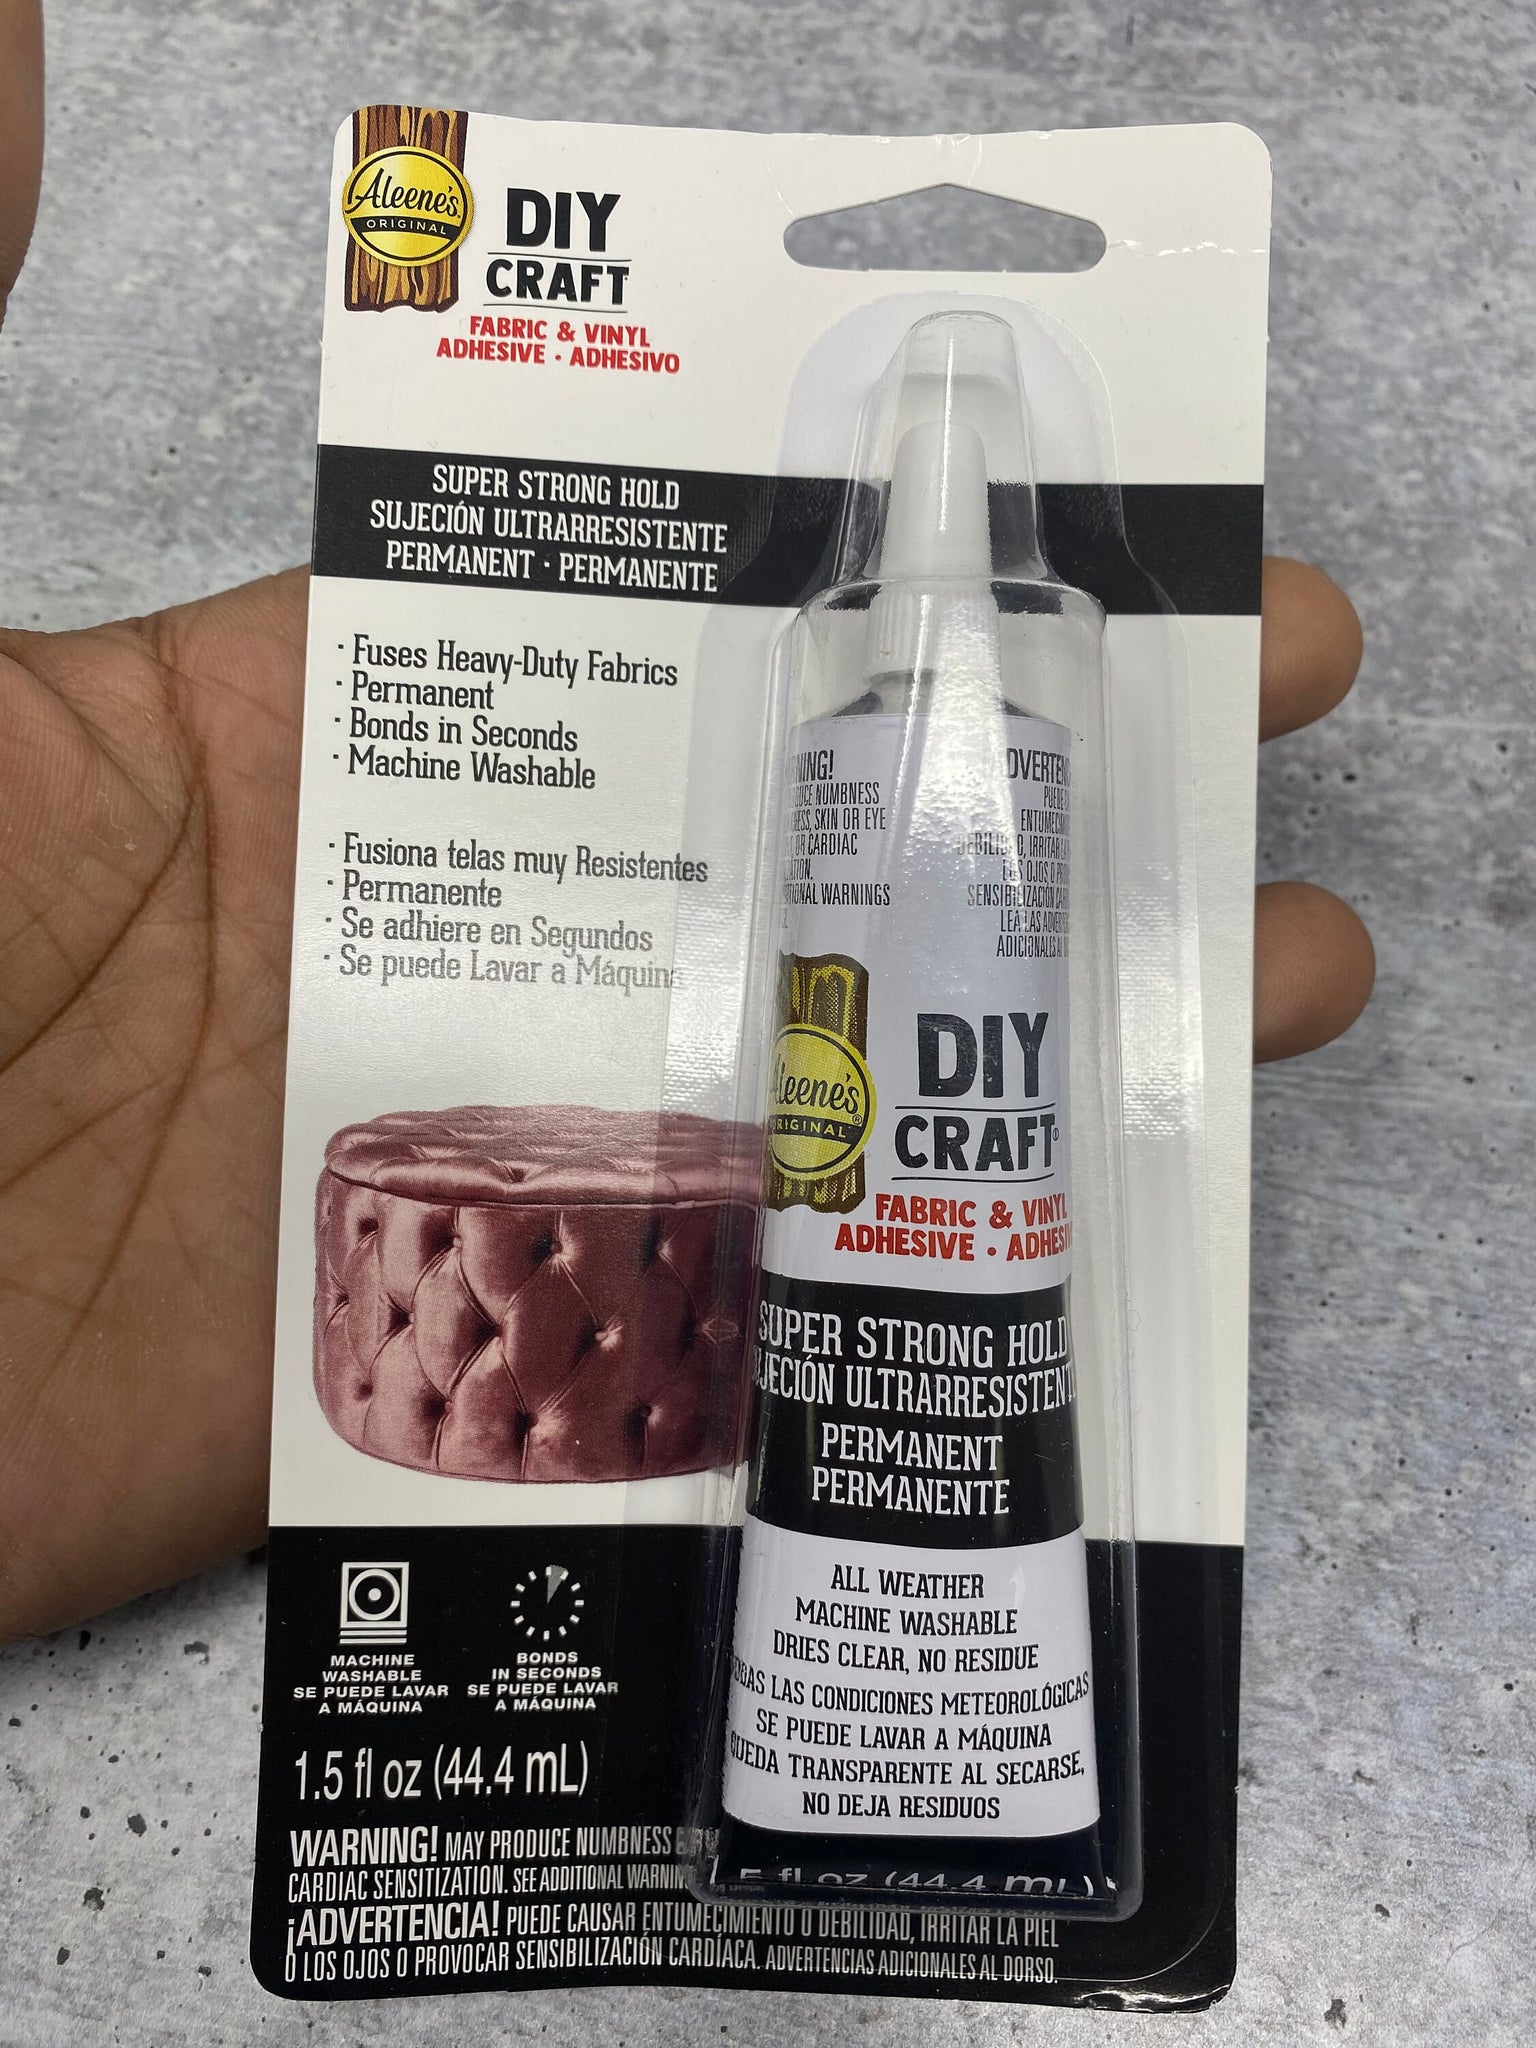 NEW, "DIY Craft Fabric & Vinyl" Fabric/Vinyl Adhesive, Super-Strong Hold, Great for Heavy Duty Fabric, Bonds in Seconds, 1.5 fl oz (44.4 mL)